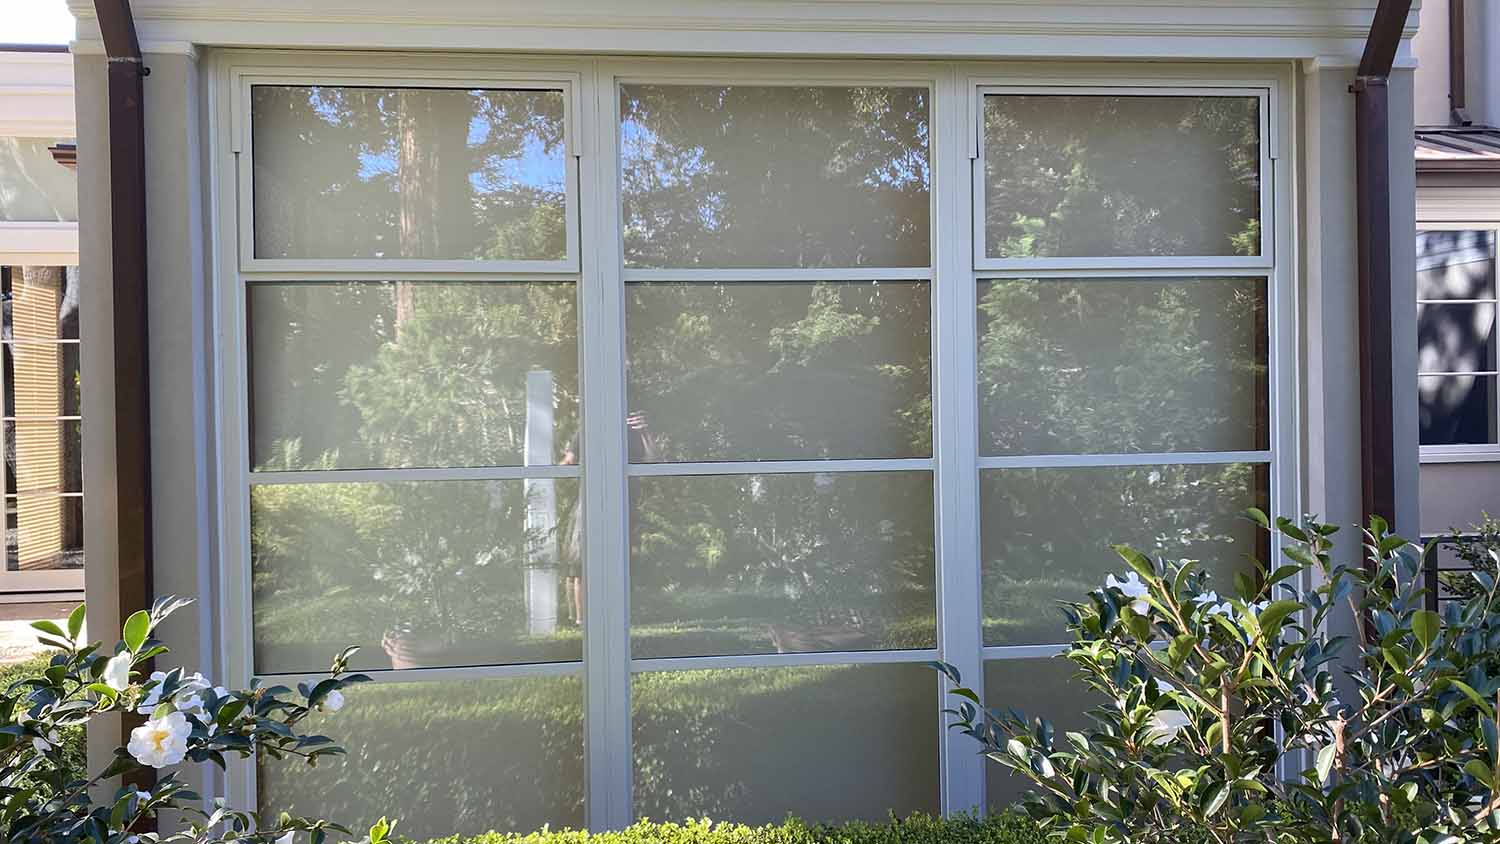 3M Prestige Exterior Window Film for Atherton, CA homes, installed by ClimatePro.